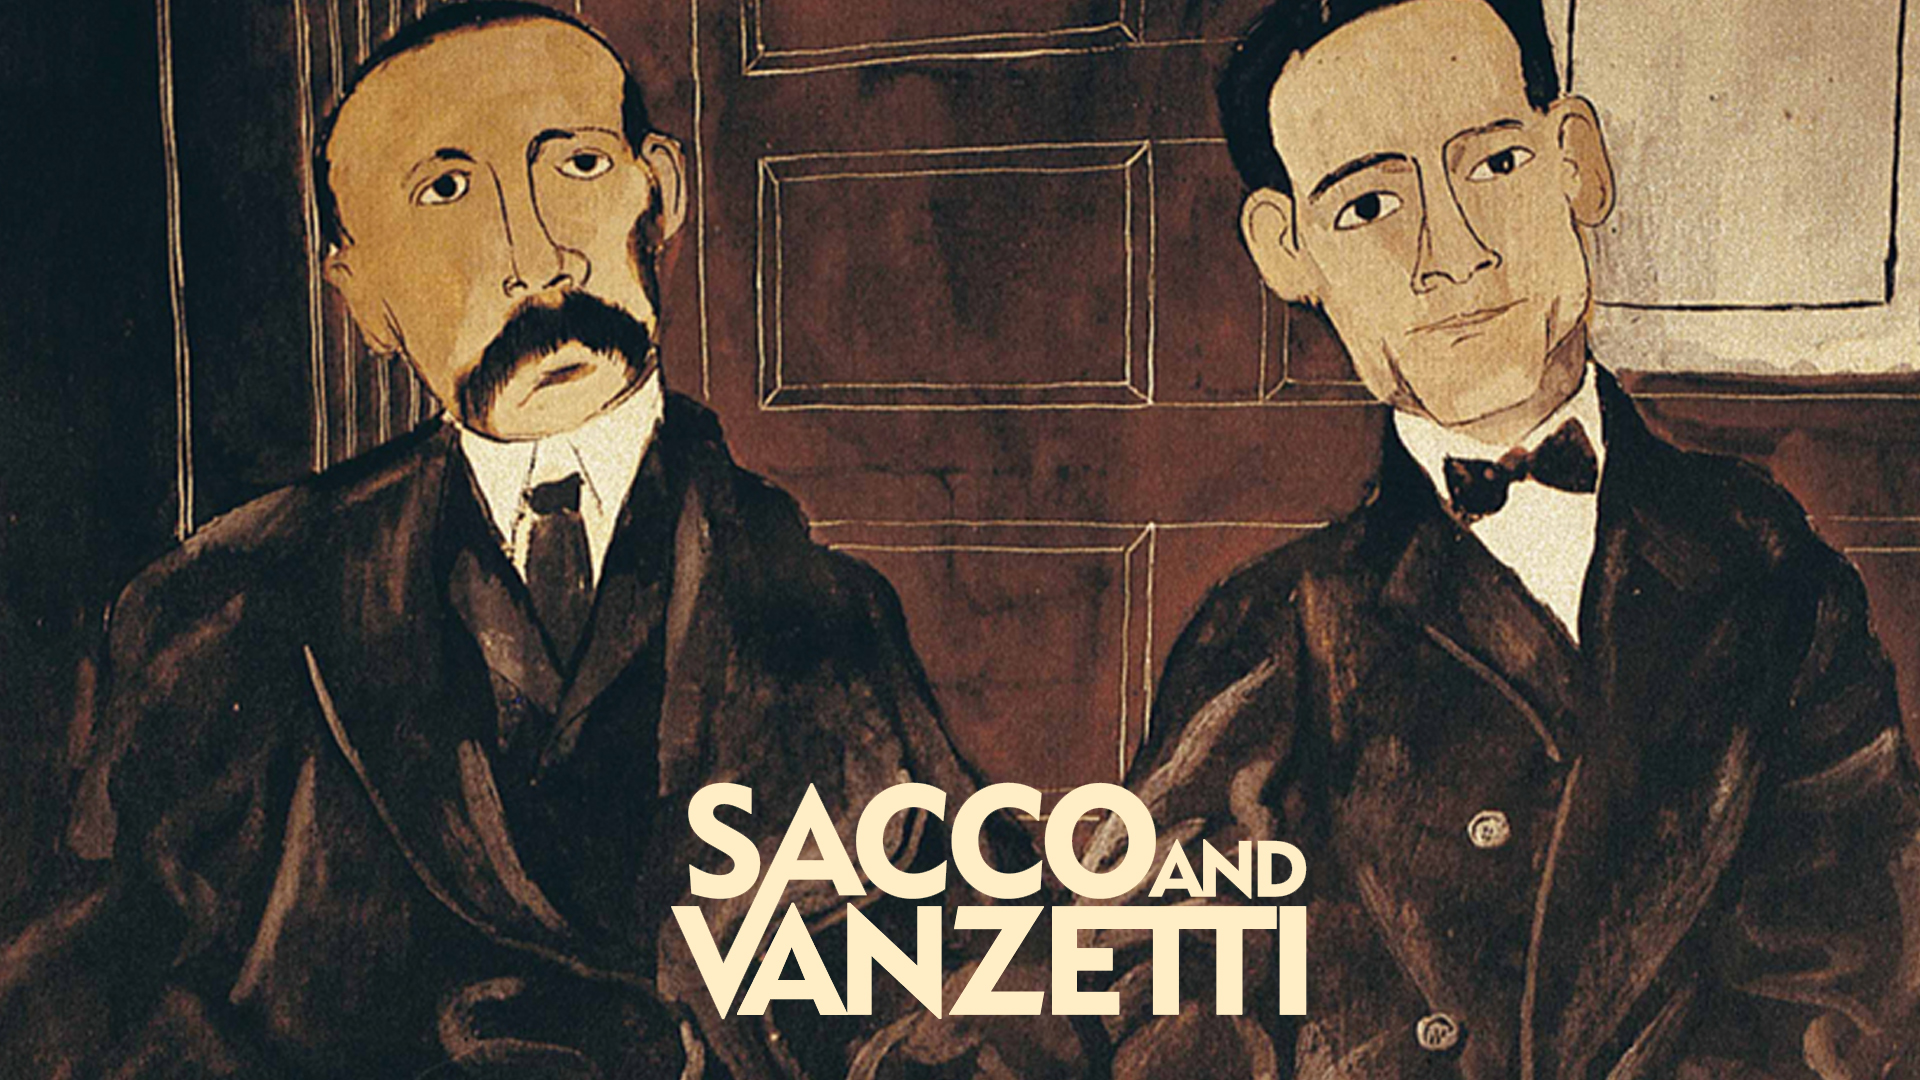 were sacco and vanzetti ever pardoned for their crimes